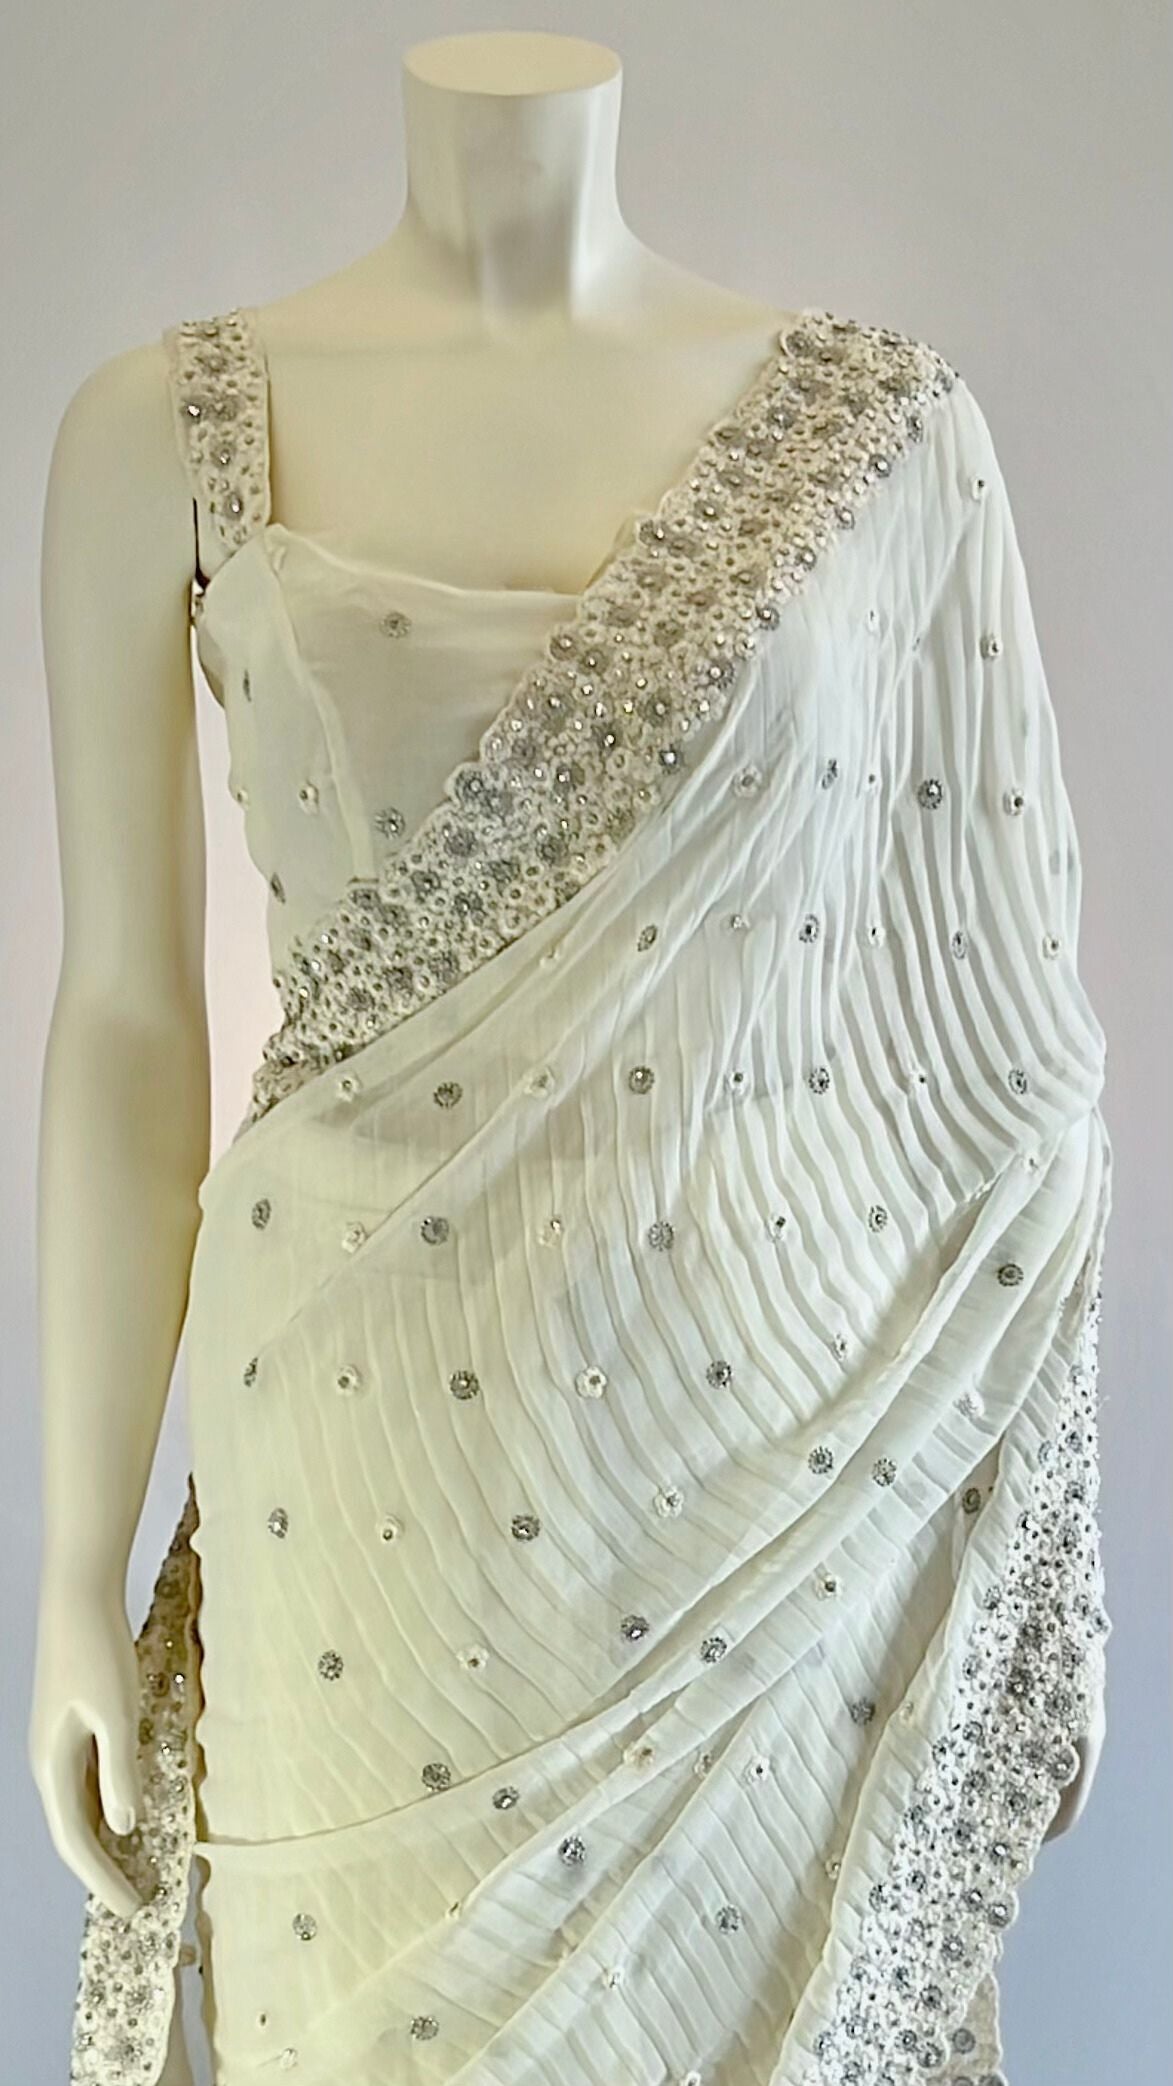 Cream Georgette Ready-to-Wear Saree with Designer Blouse - Elegant Fashion for Discerning Women | Buy Now